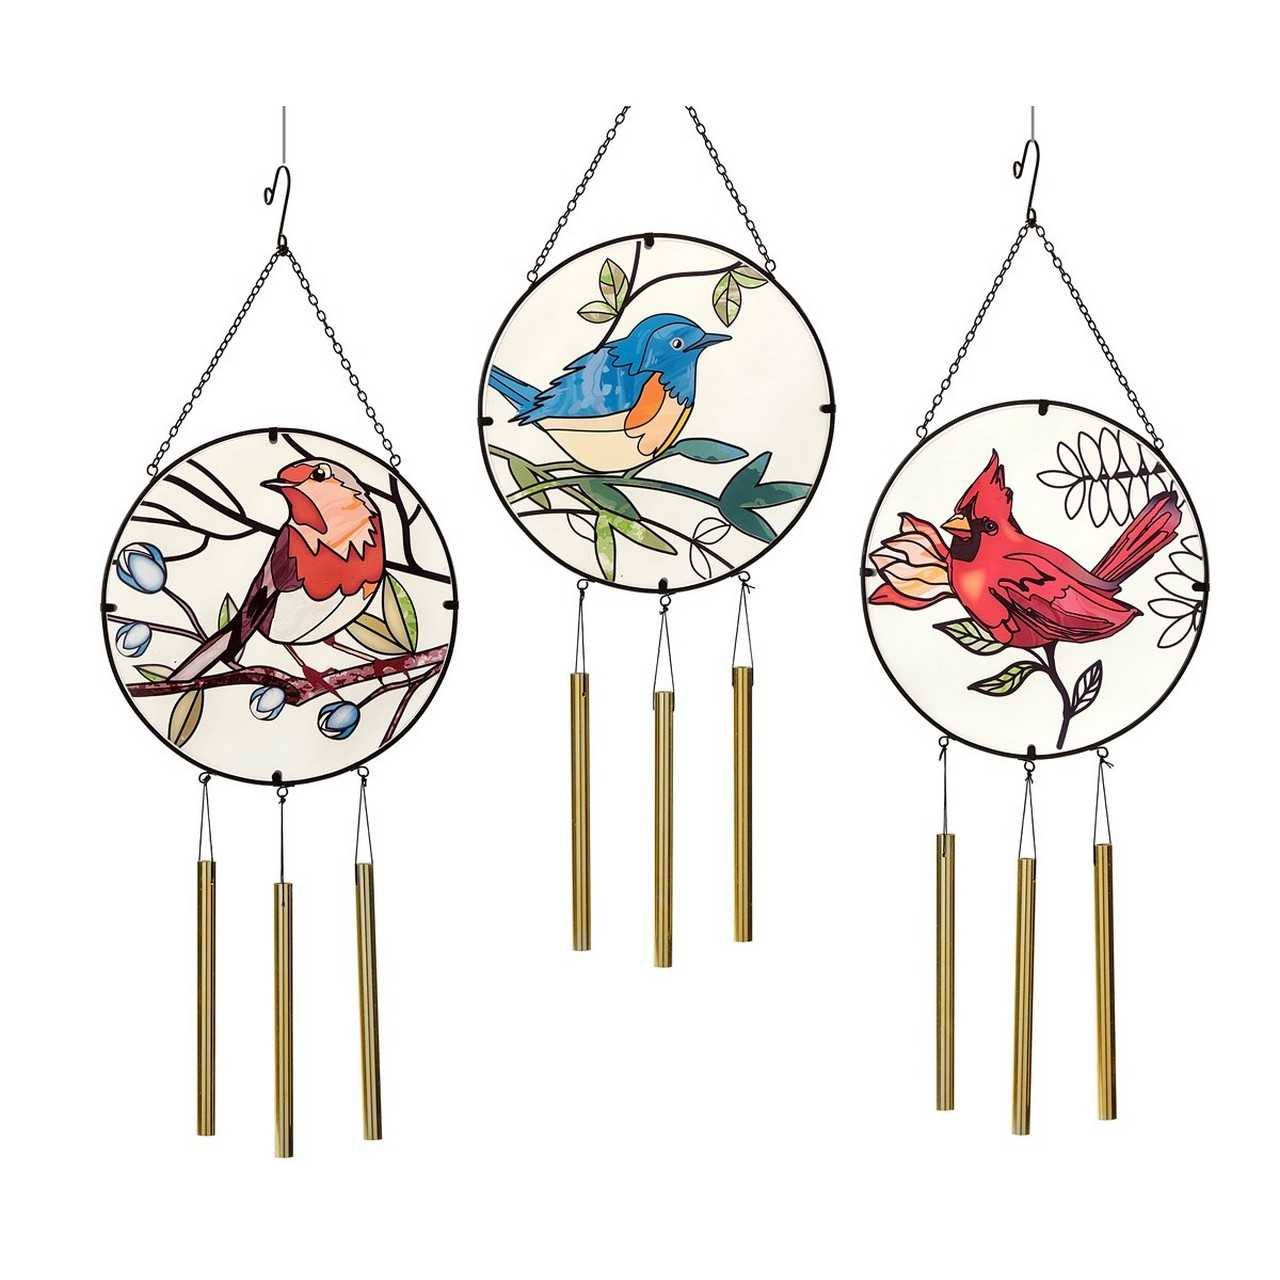 https://cdn11.bigcommerce.com/s-36vh87glm0/images/stencil/1280x1280/products/15522/33287/Giftcraft-Suncatcher-Bird-Chime_22650__10368.1693428867.jpg?c=1?imbypass=on